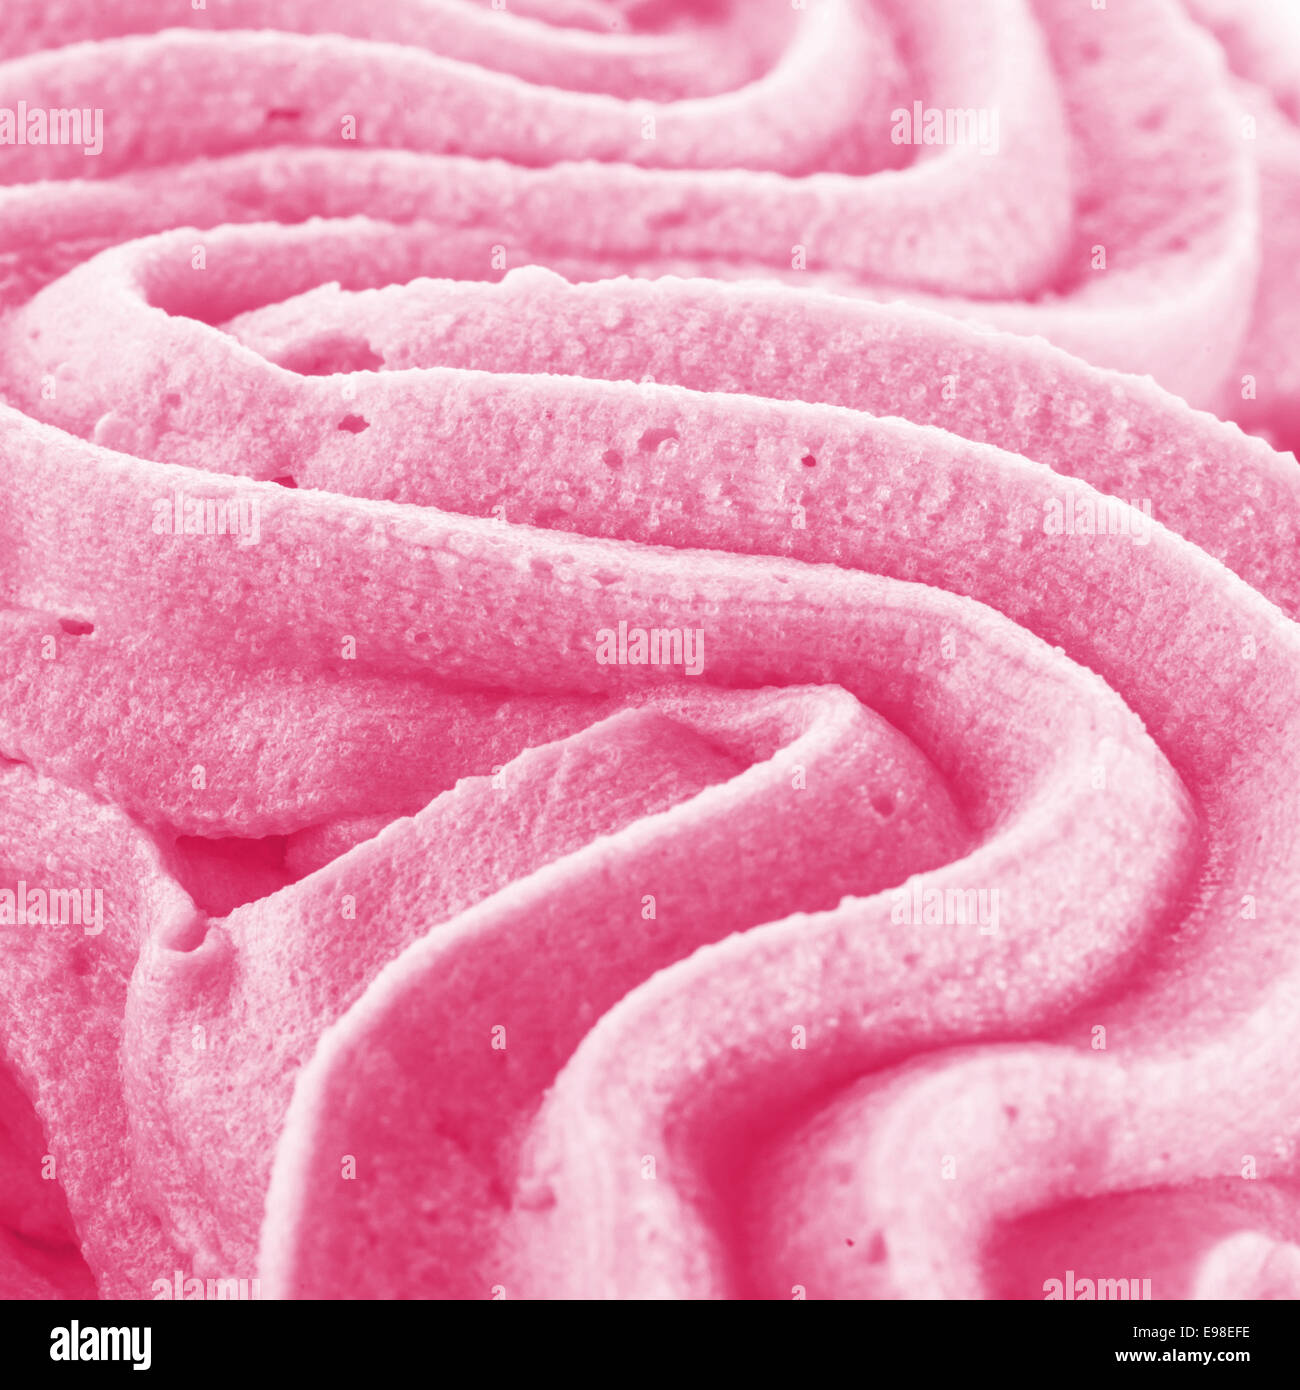 Background texture of swirling pink Italian ice cream with a ridged pattern in square format Stock Photo